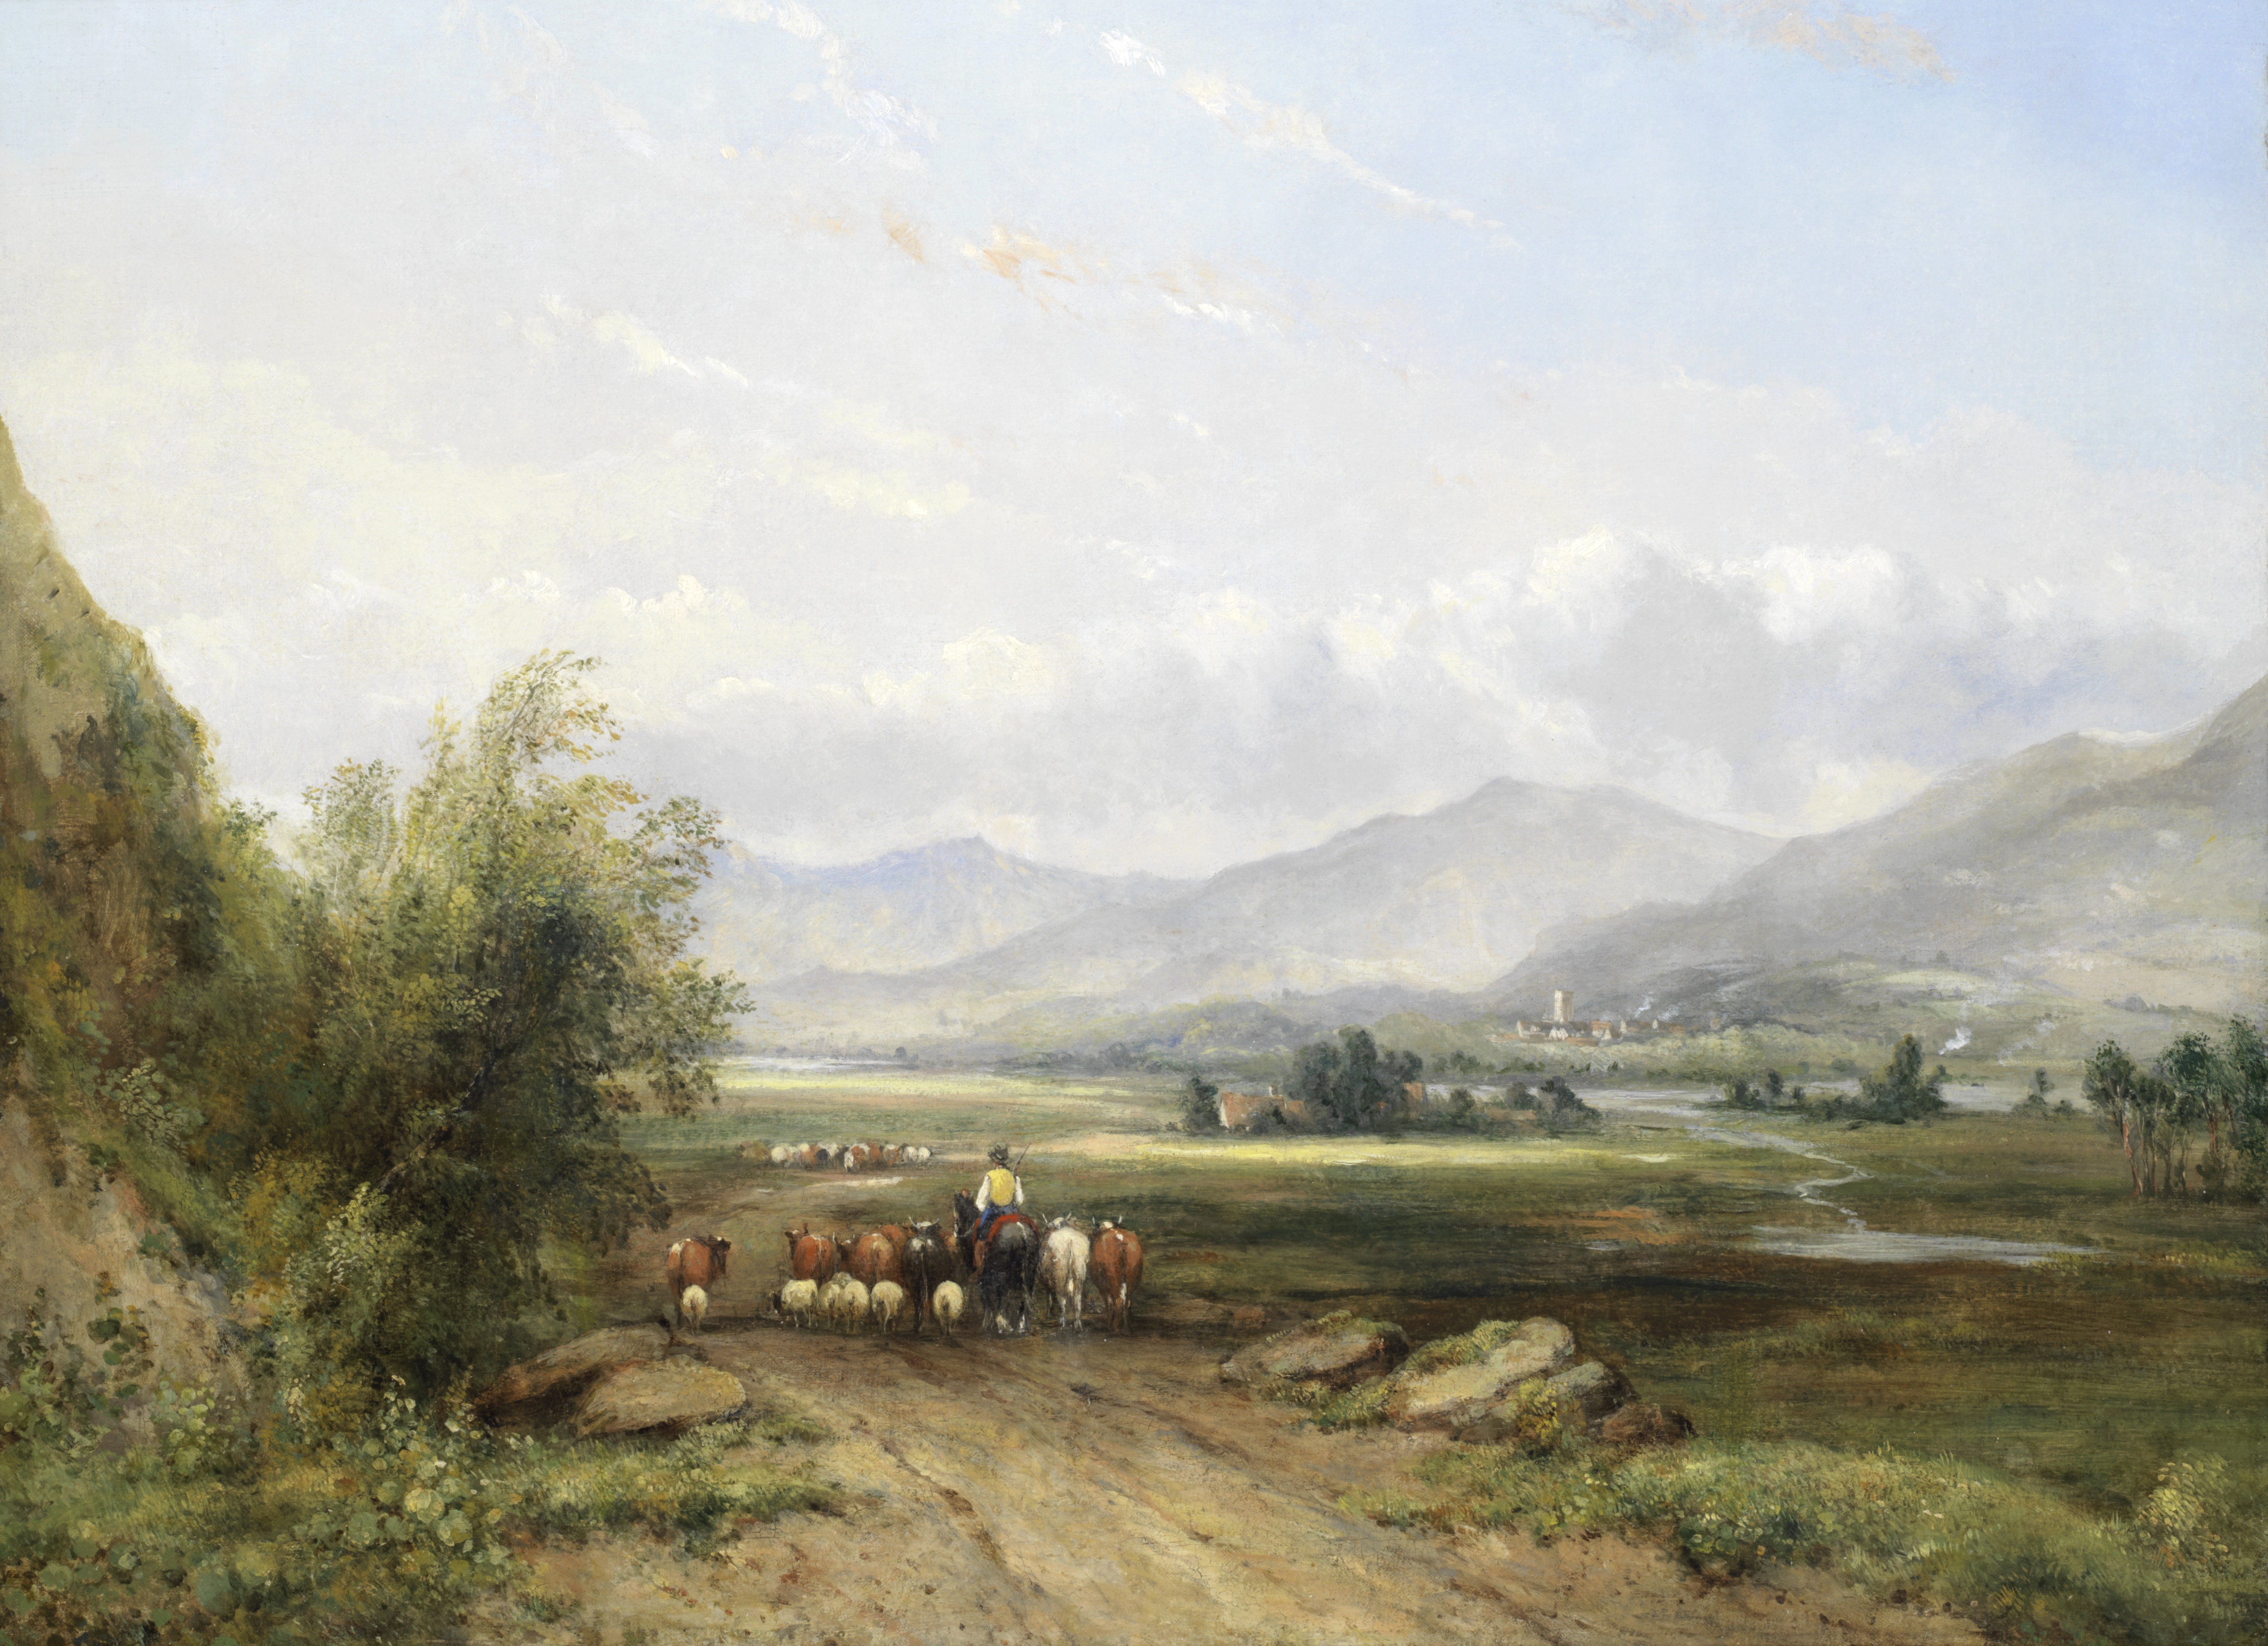 Attributed to Frederick William 'Waters' Watts (British, 1800-1862) Driving sheep through the valley